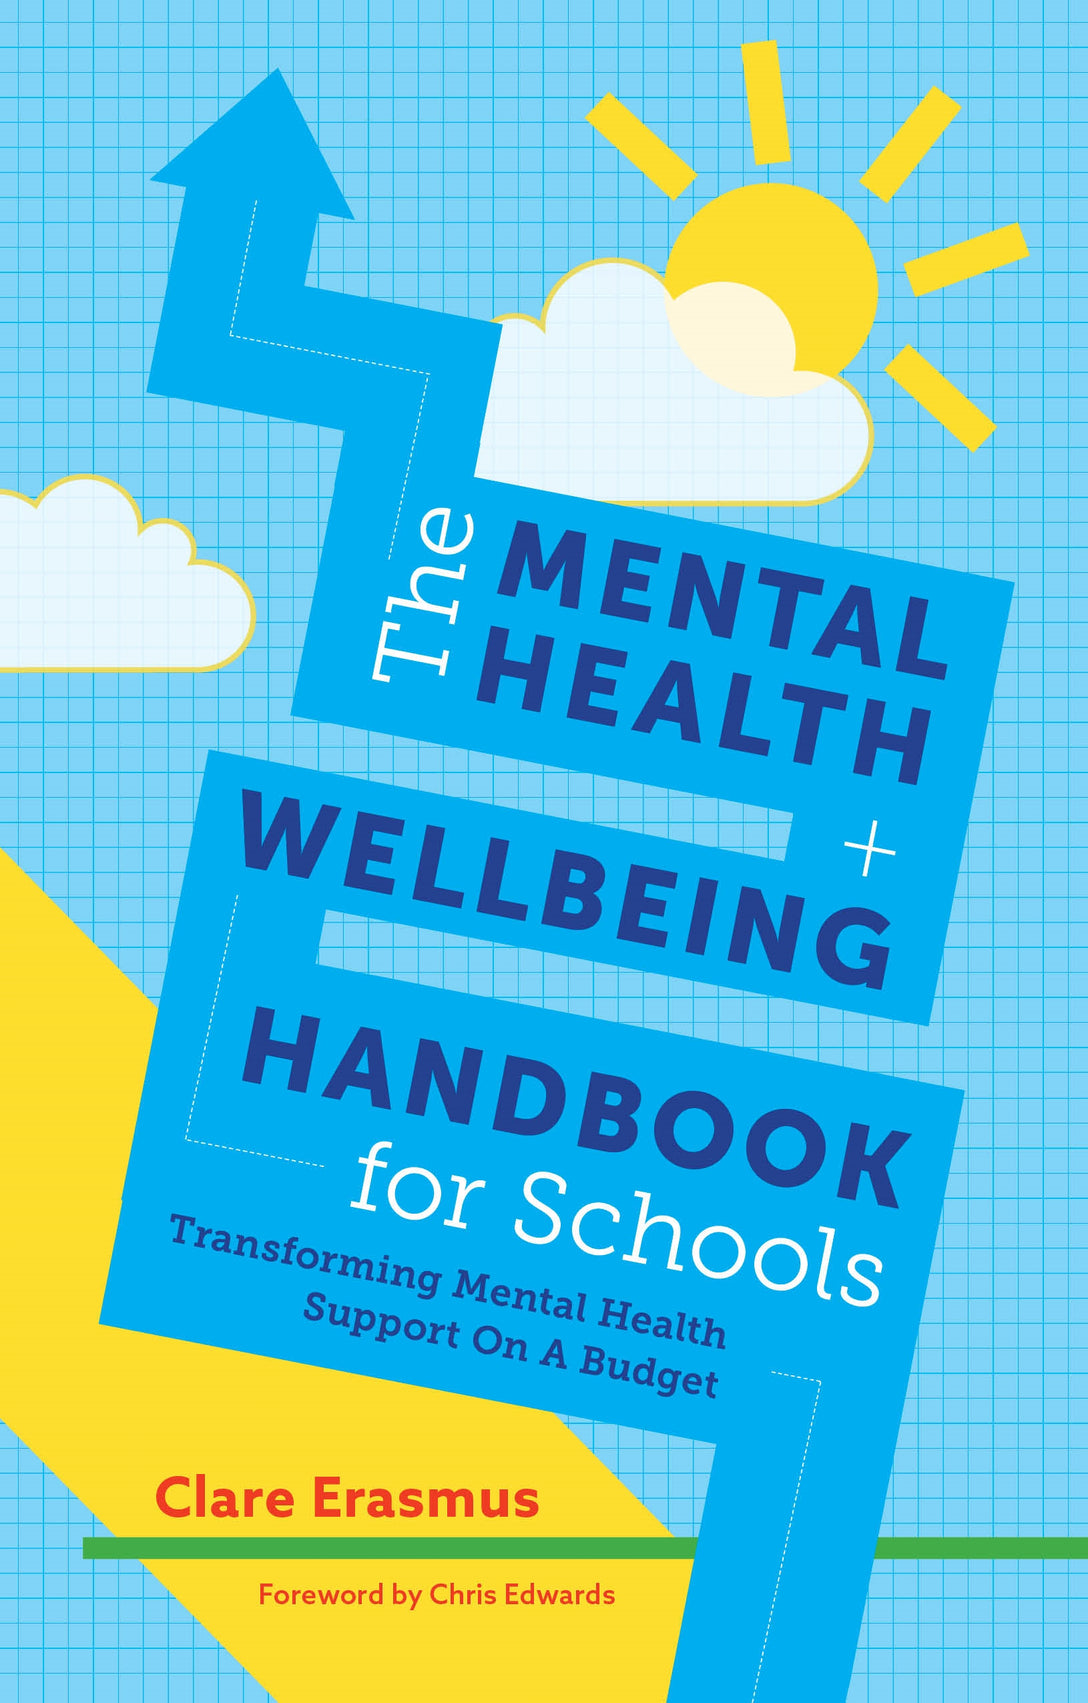 The Mental Health and Wellbeing Handbook for Schools by Clare Erasmus, Chris Edwards